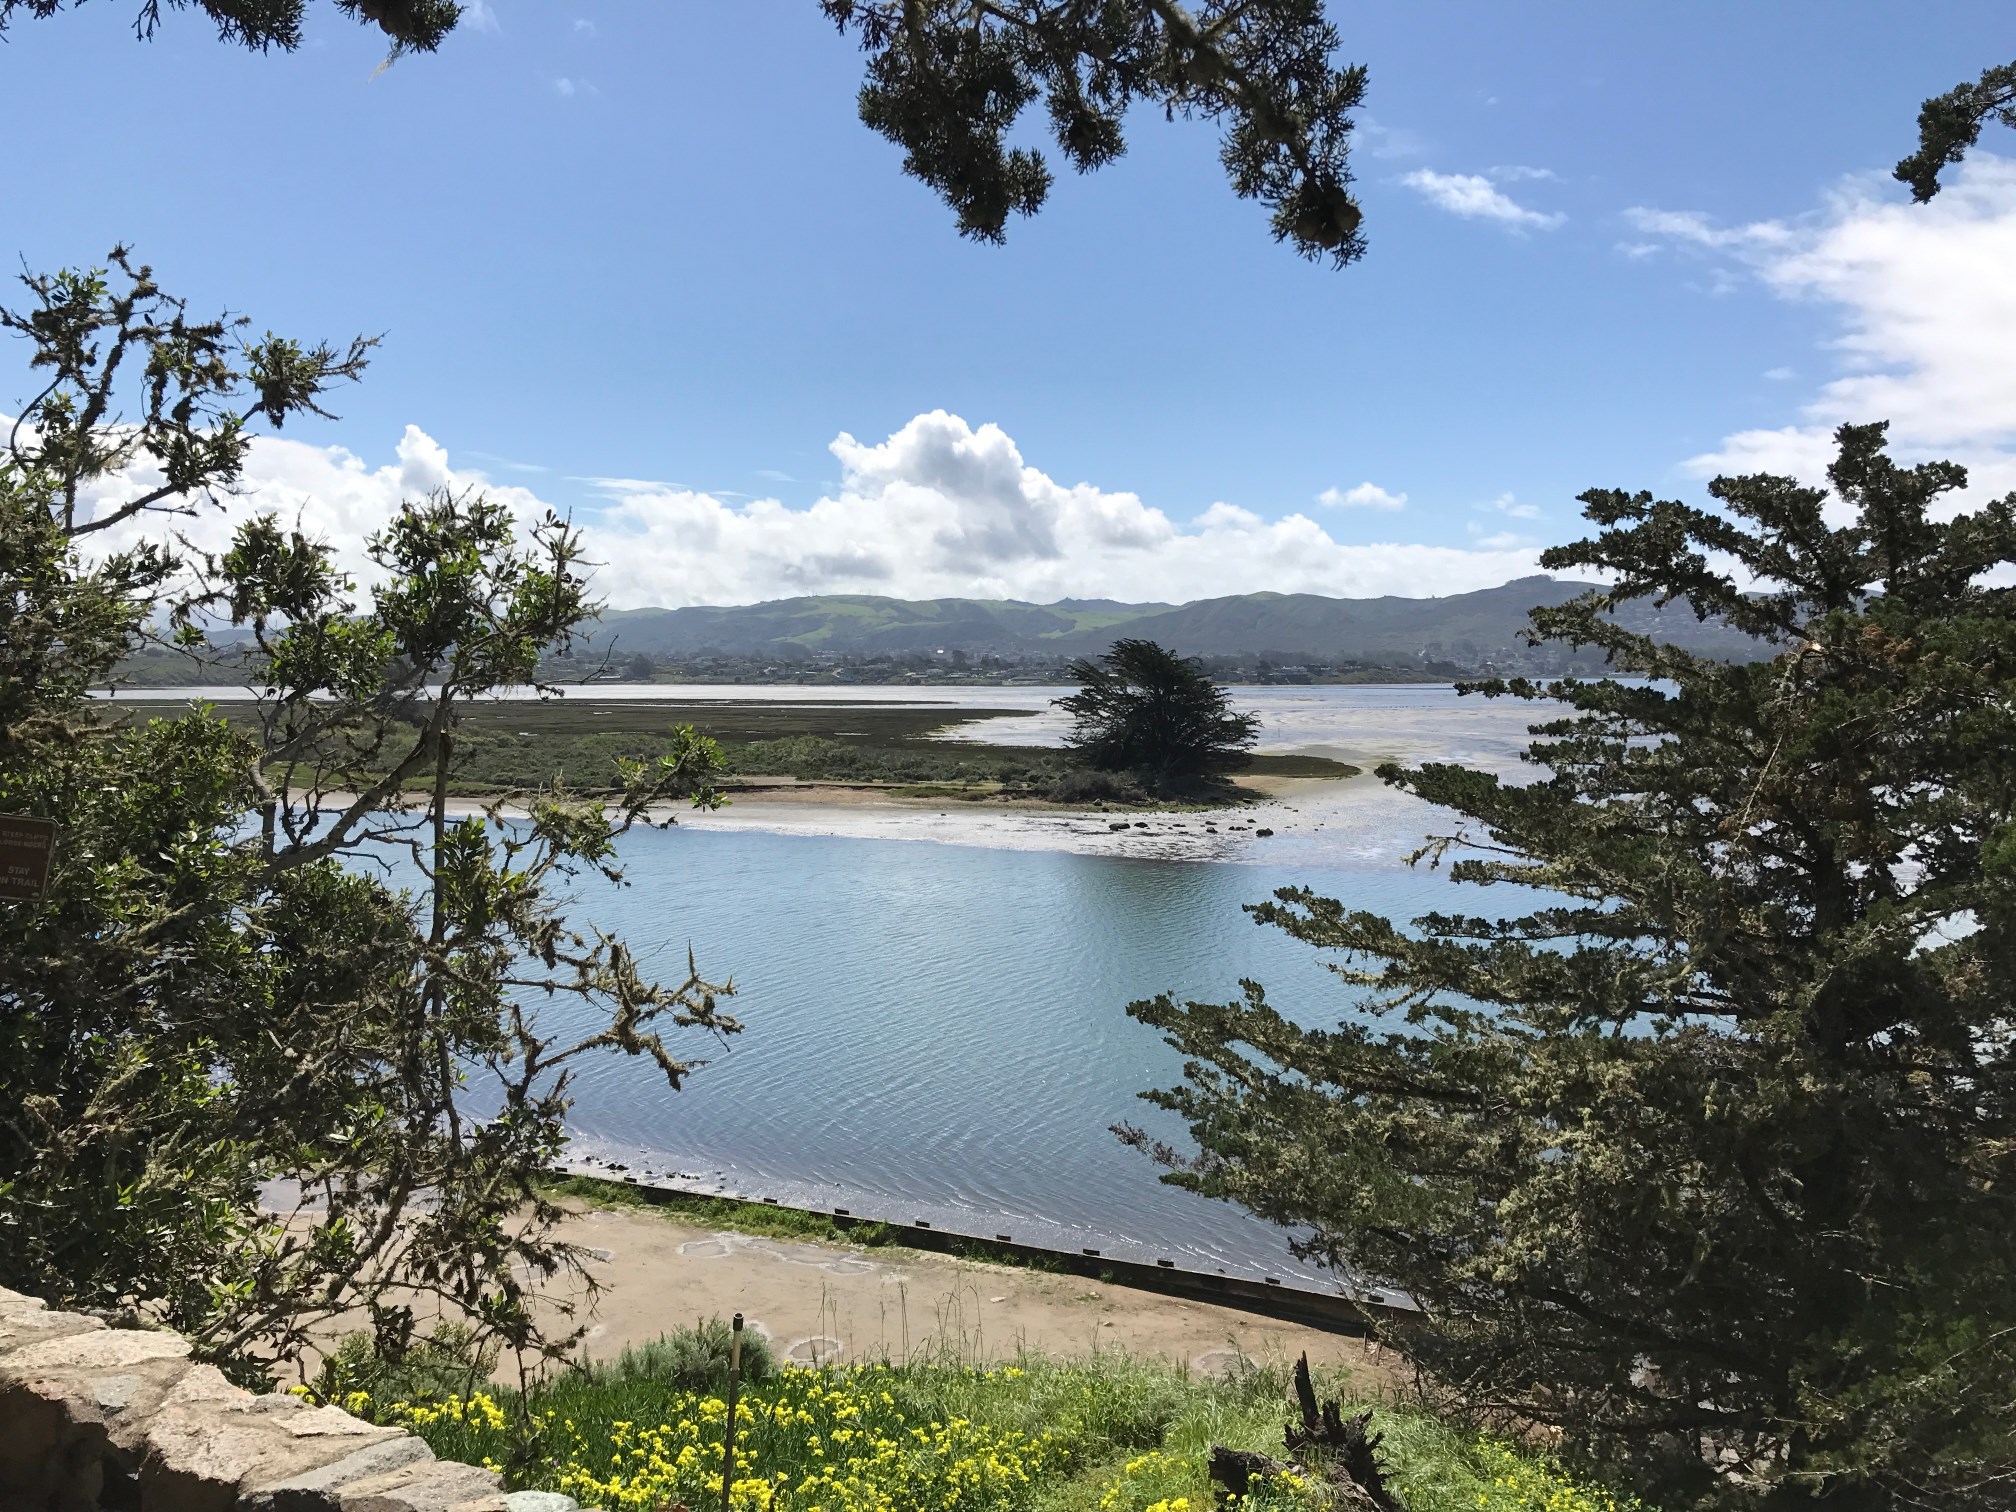  View of Los Osos from the Morro Bay Natural Museum. Photo by Robin Hendry